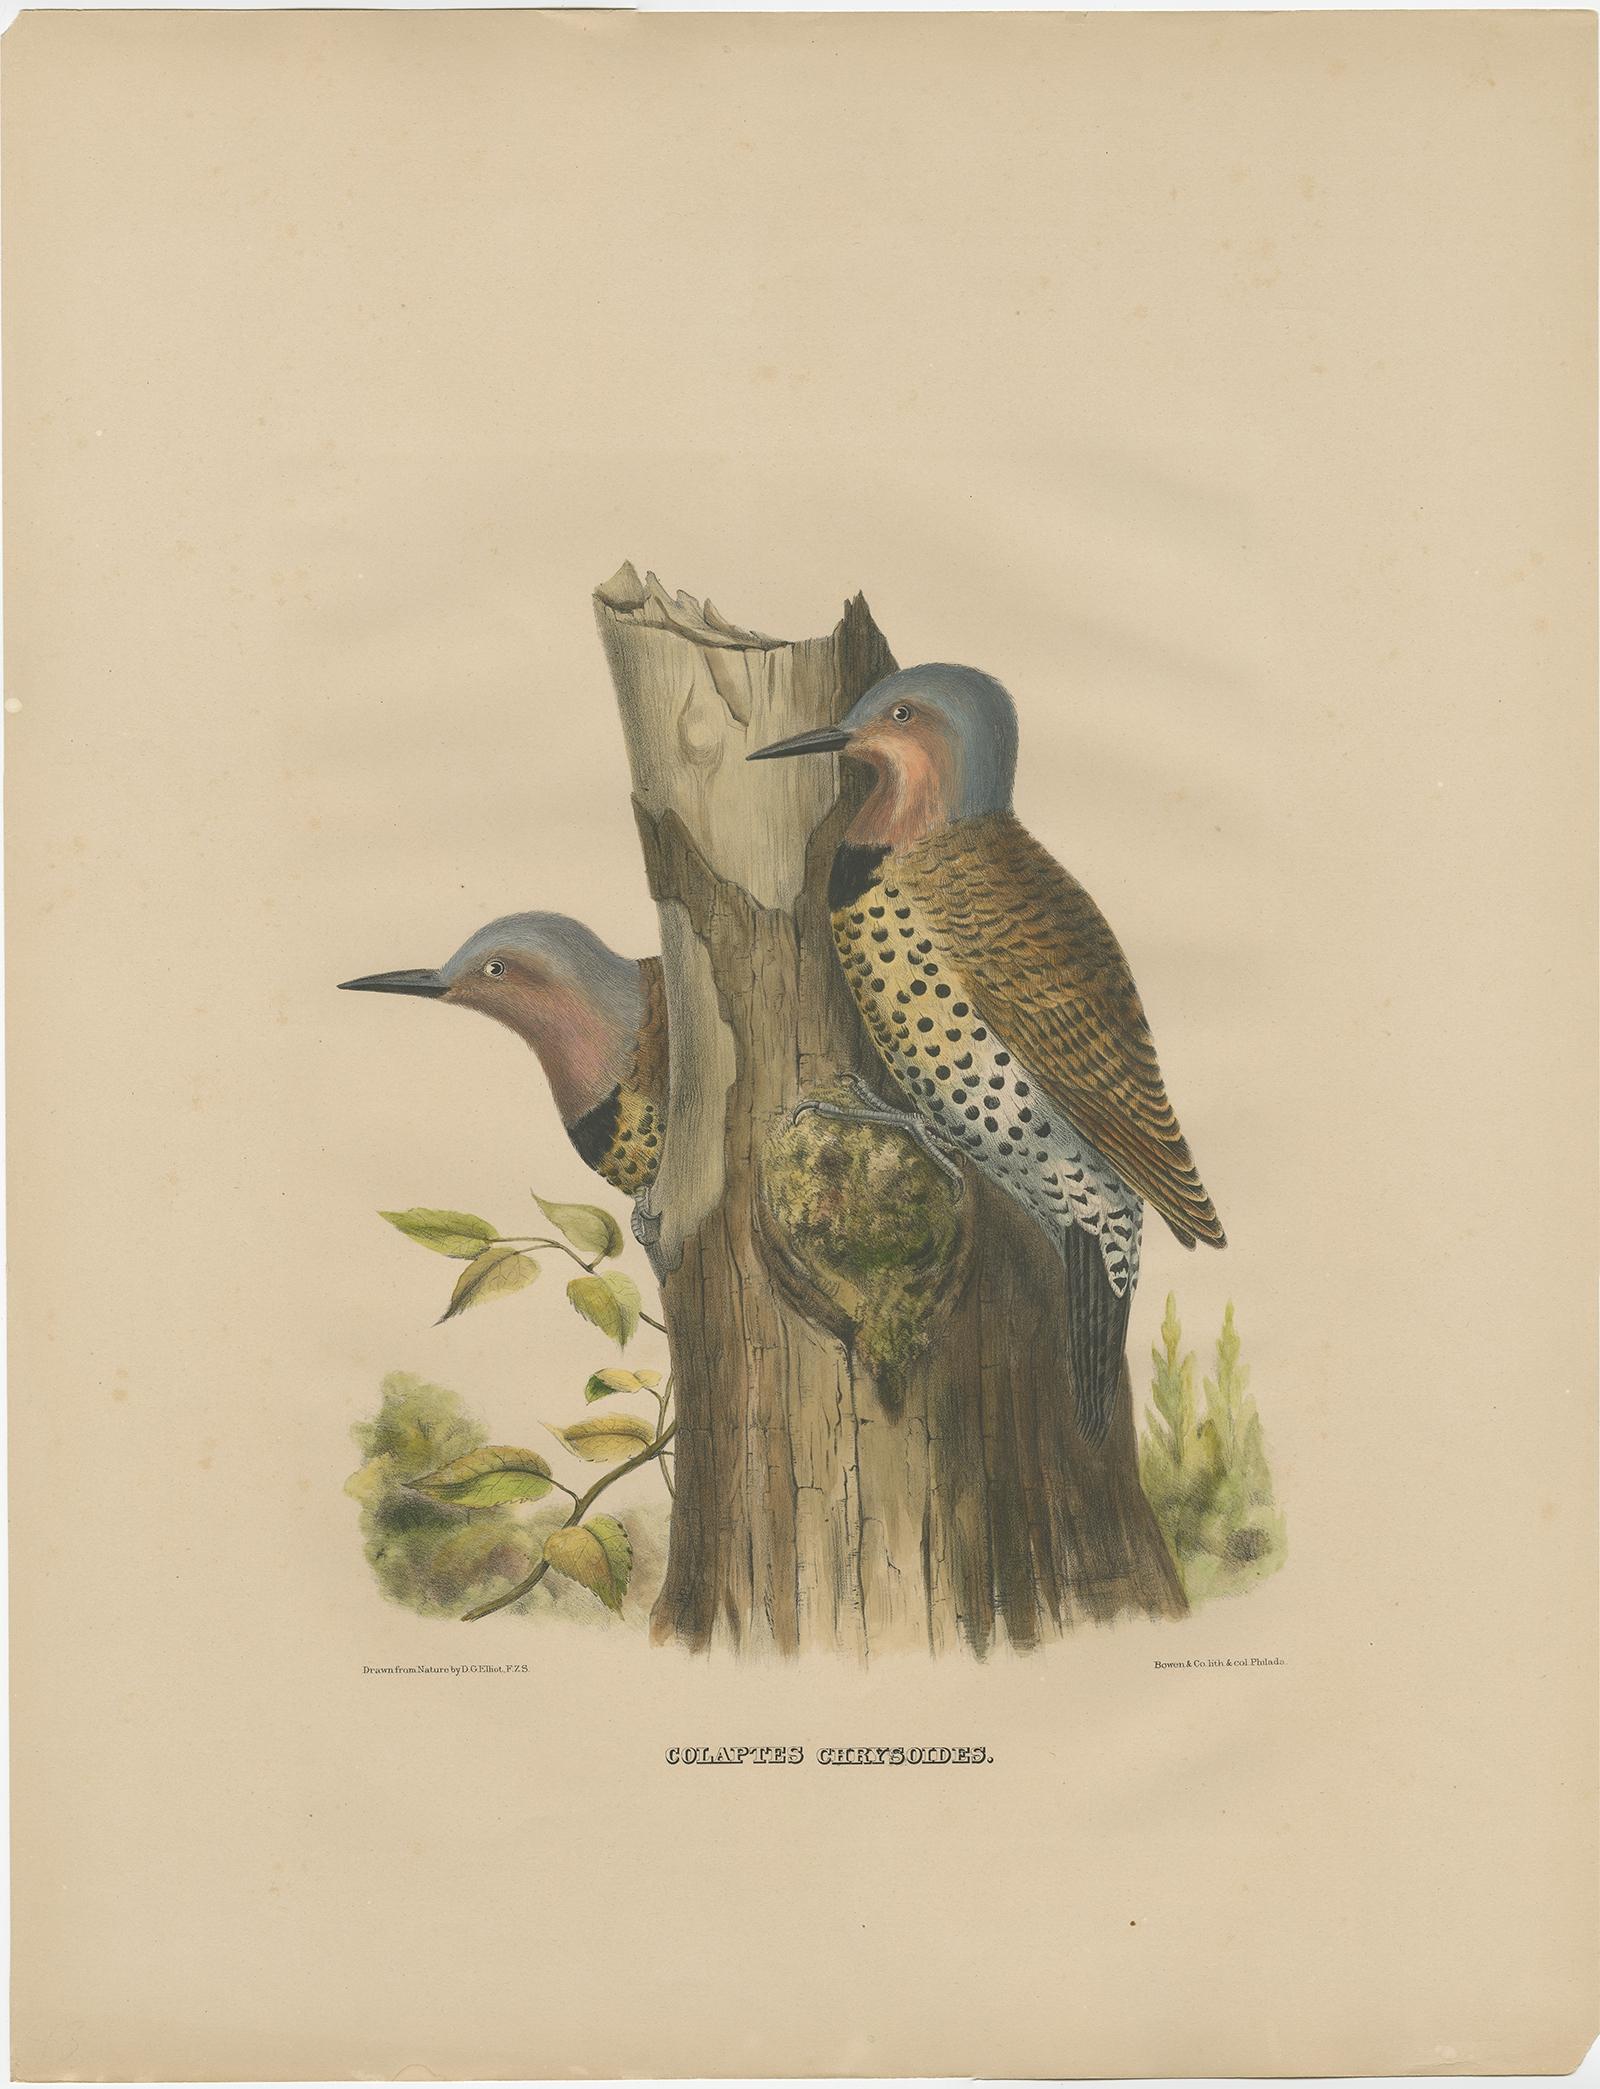 Antique bird print titled 'Colaptes Chrysoldes'. 

Old bird print depicting two gilded flickers. This print originates from 'The new and heretofore unfigured species of the birds of North America', published 1866-1869.

This spectacular large